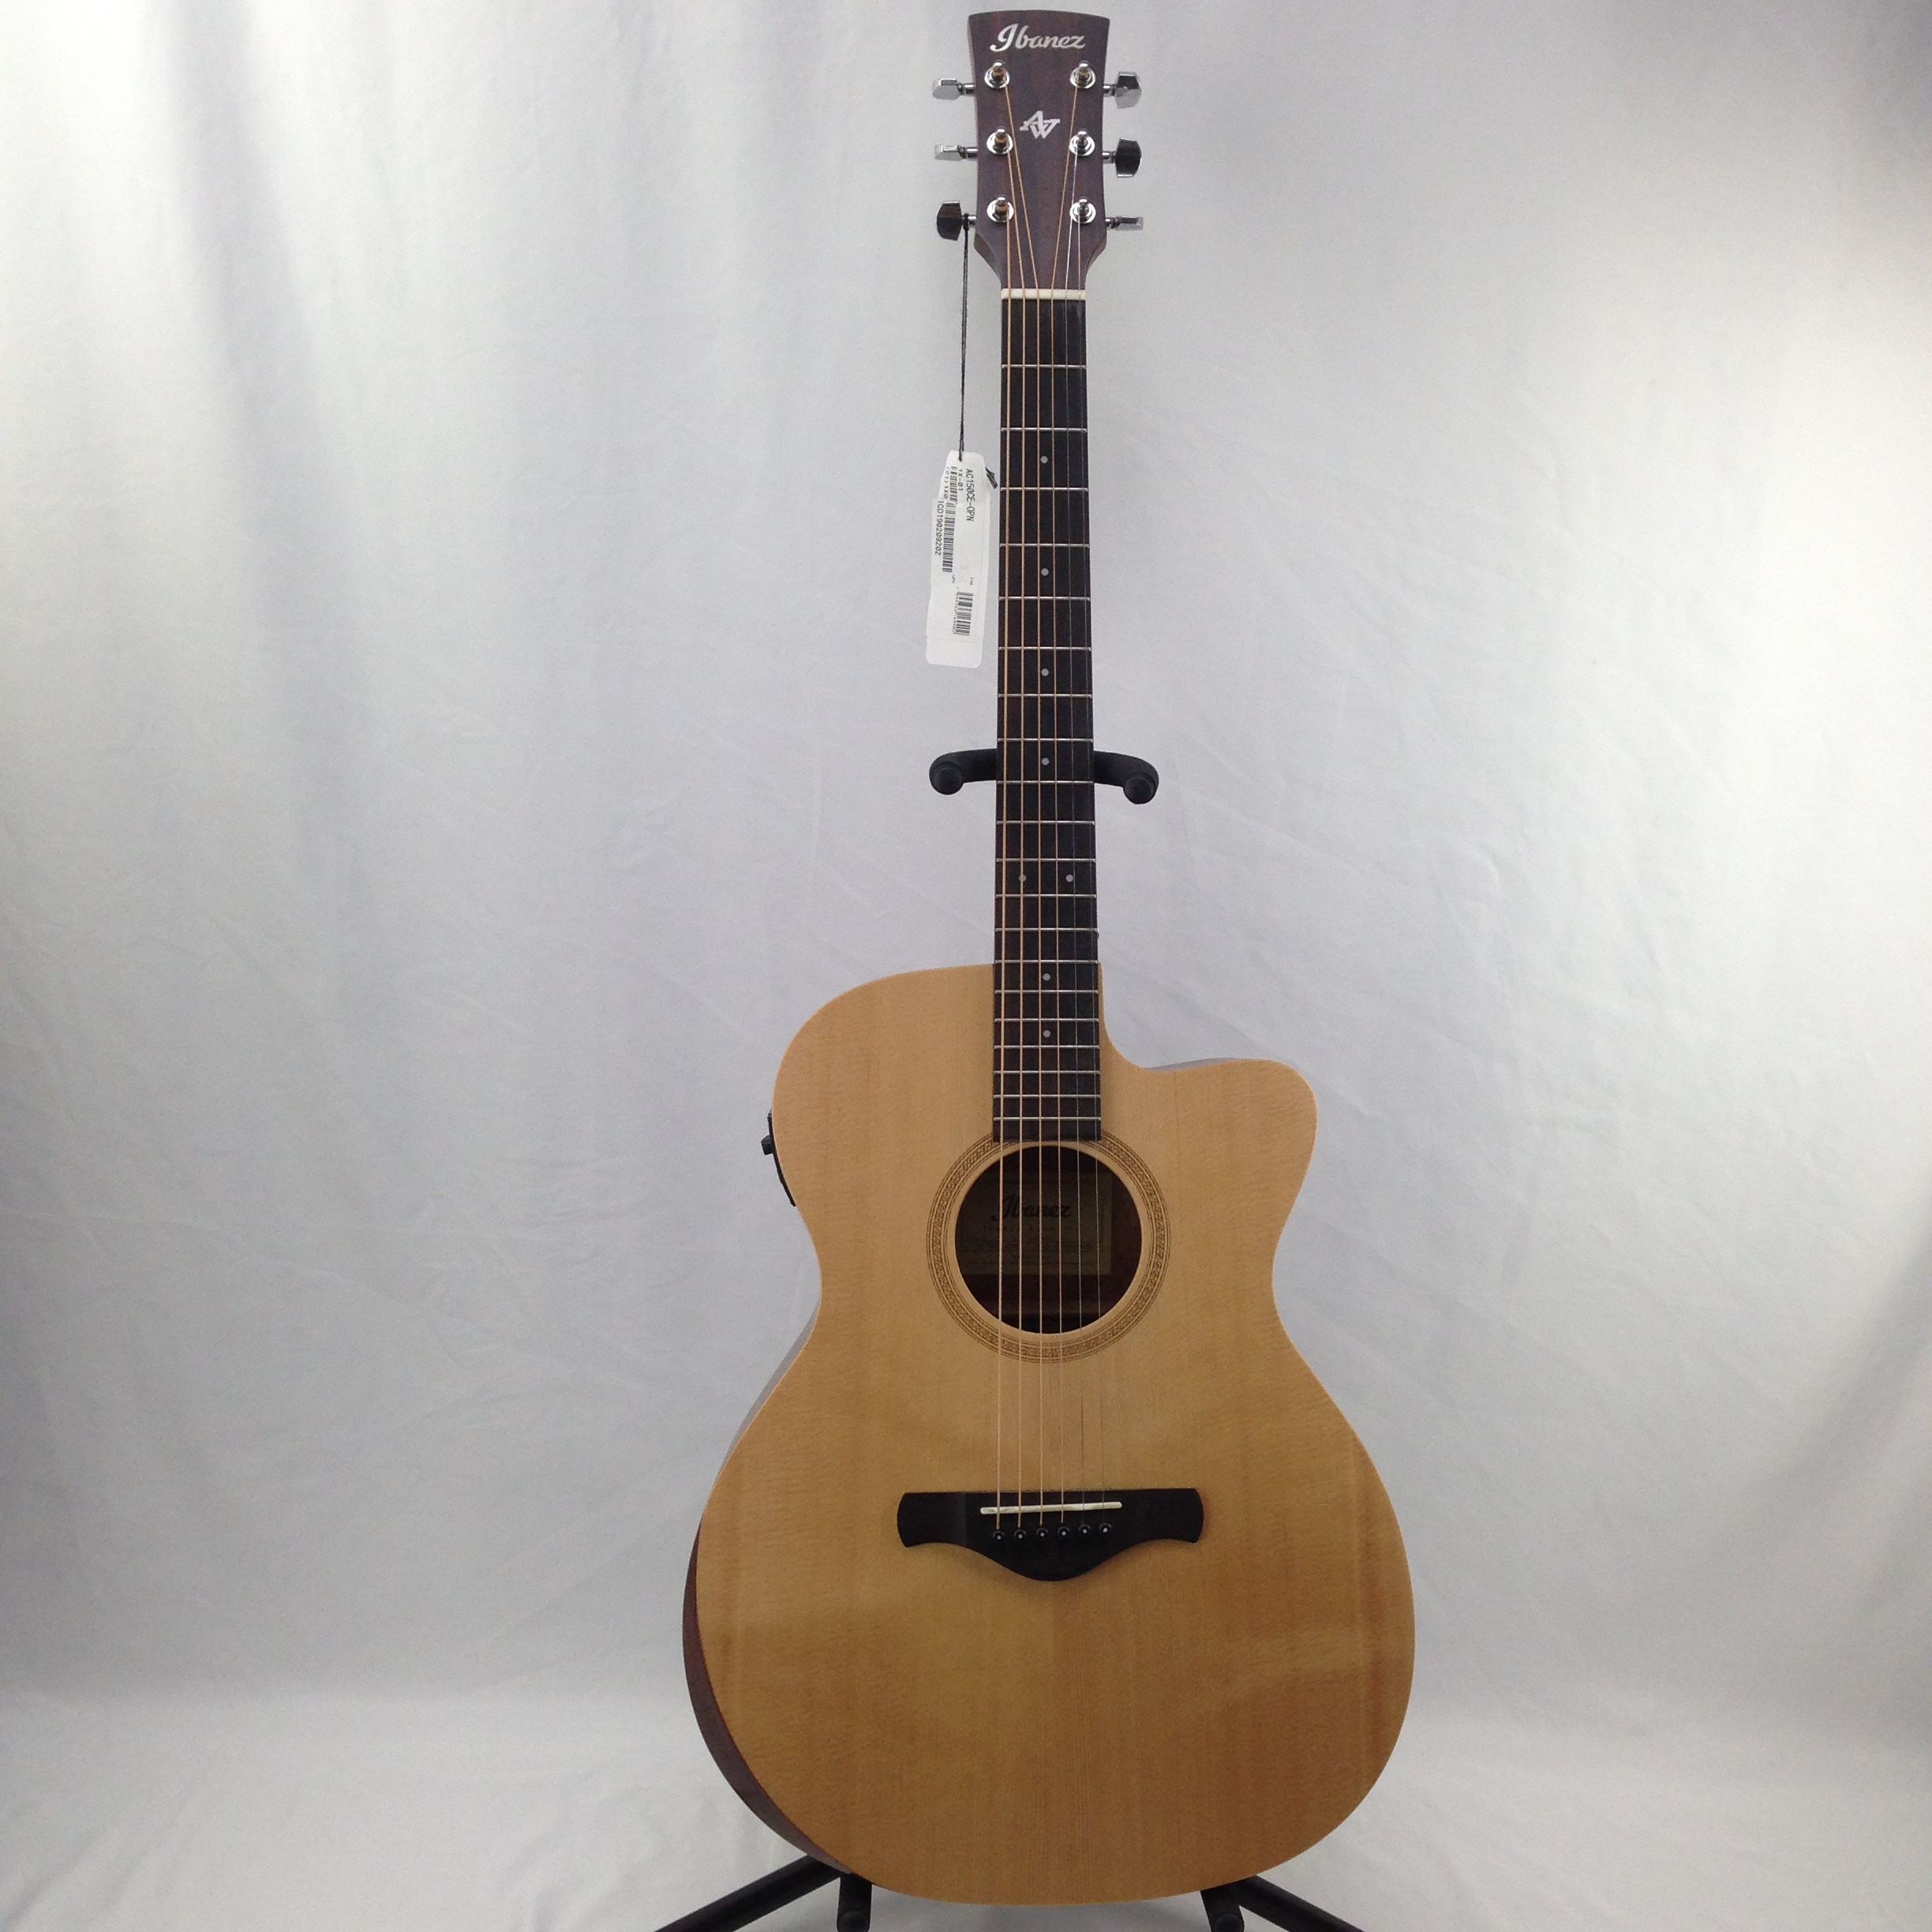 Ibanez AC150CE-OPN Right-Handed Acoustic/Electric Guitar w/ Built-in Tuner